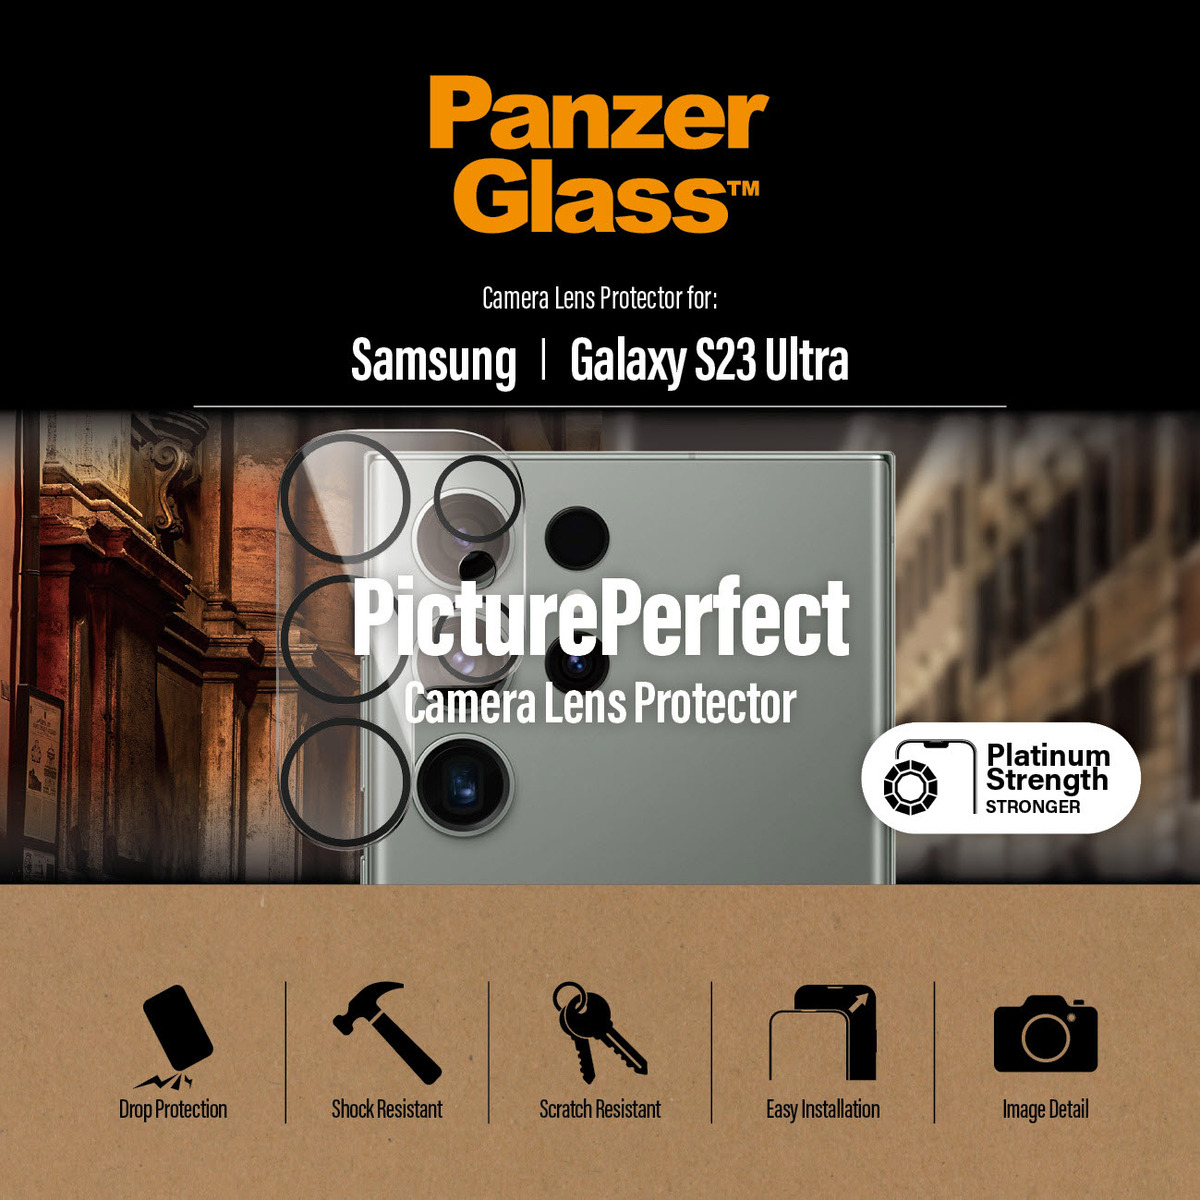 PanzerGlass PicturePerfect for Samsung Galaxy S23 Ultra